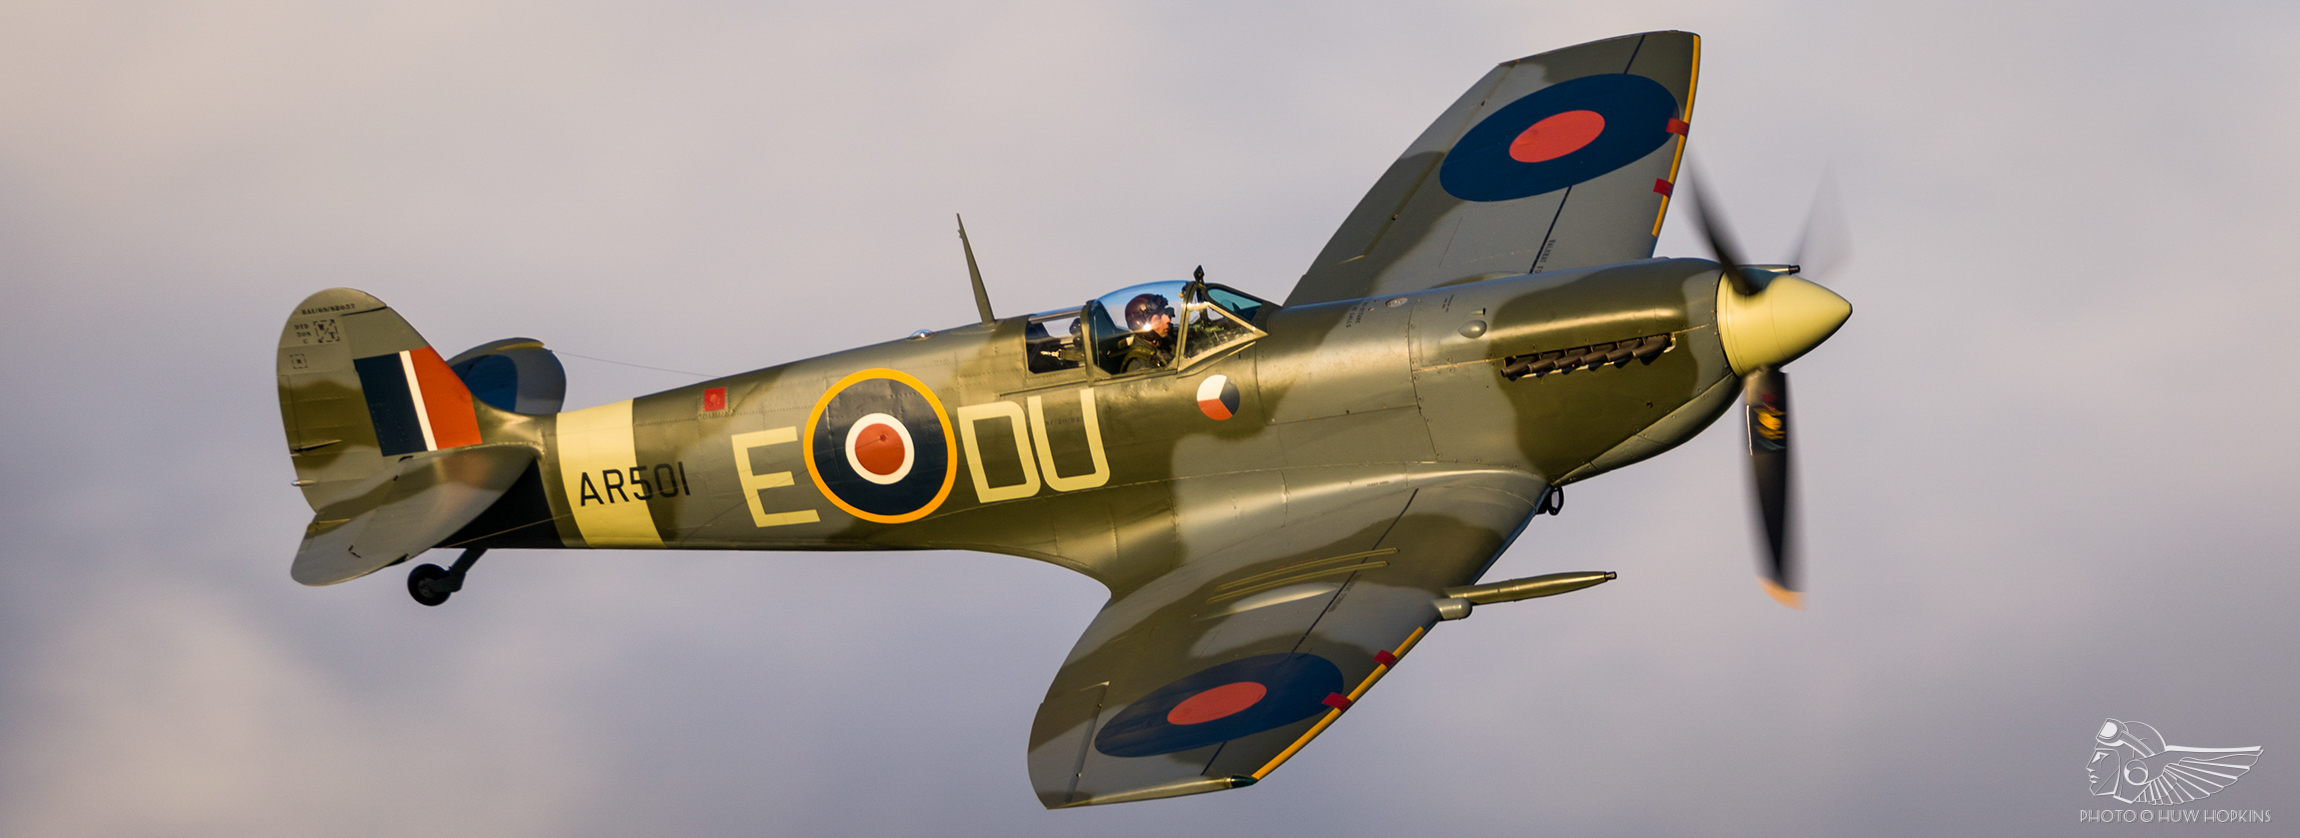 Golden Moments at Shuttleworth’s June Evening Airshow